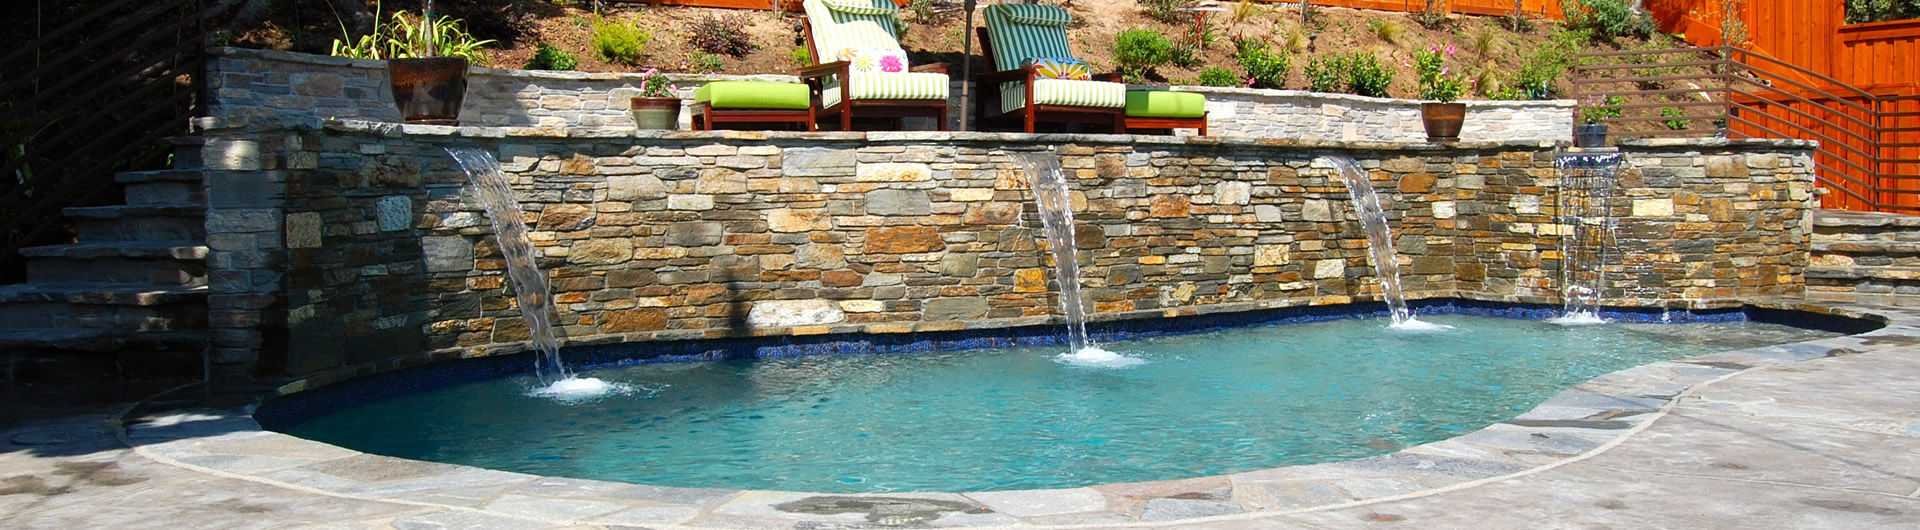 Pool and Masonry Specialists since 1970